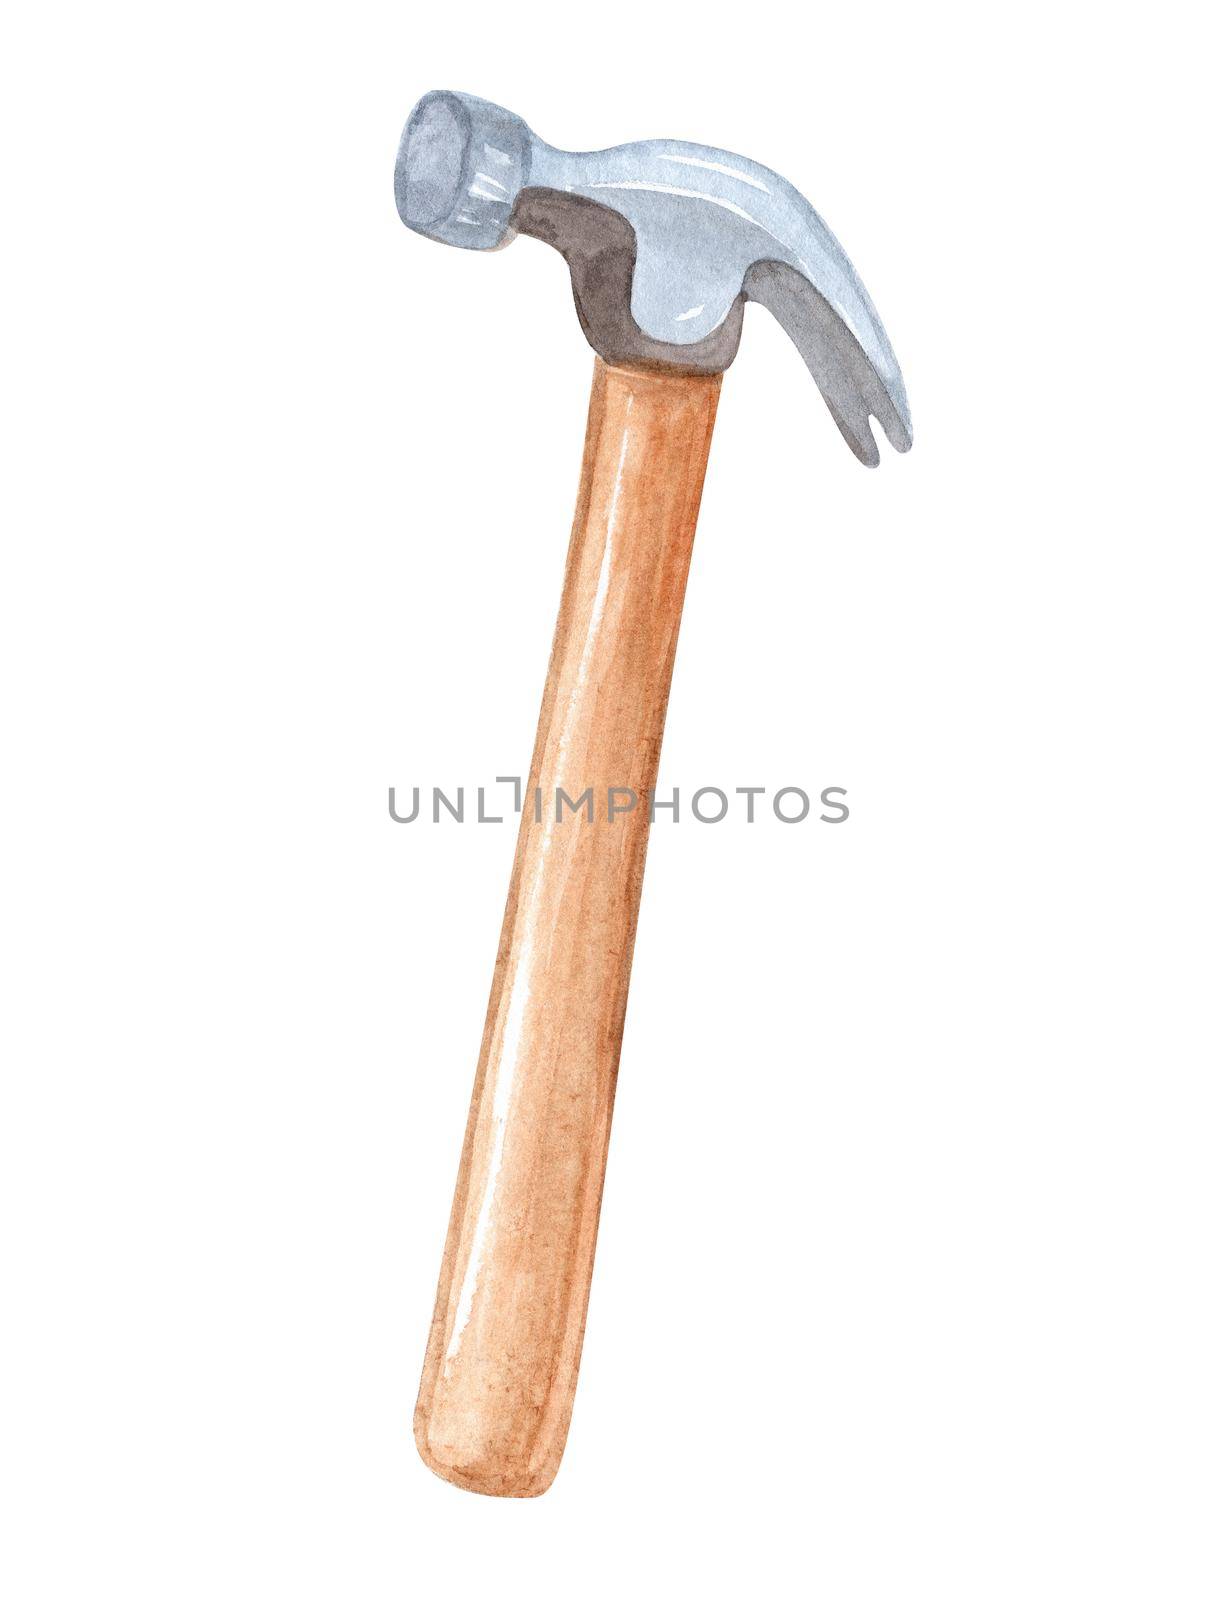 watercolor hammer tool isolated on white by dreamloud